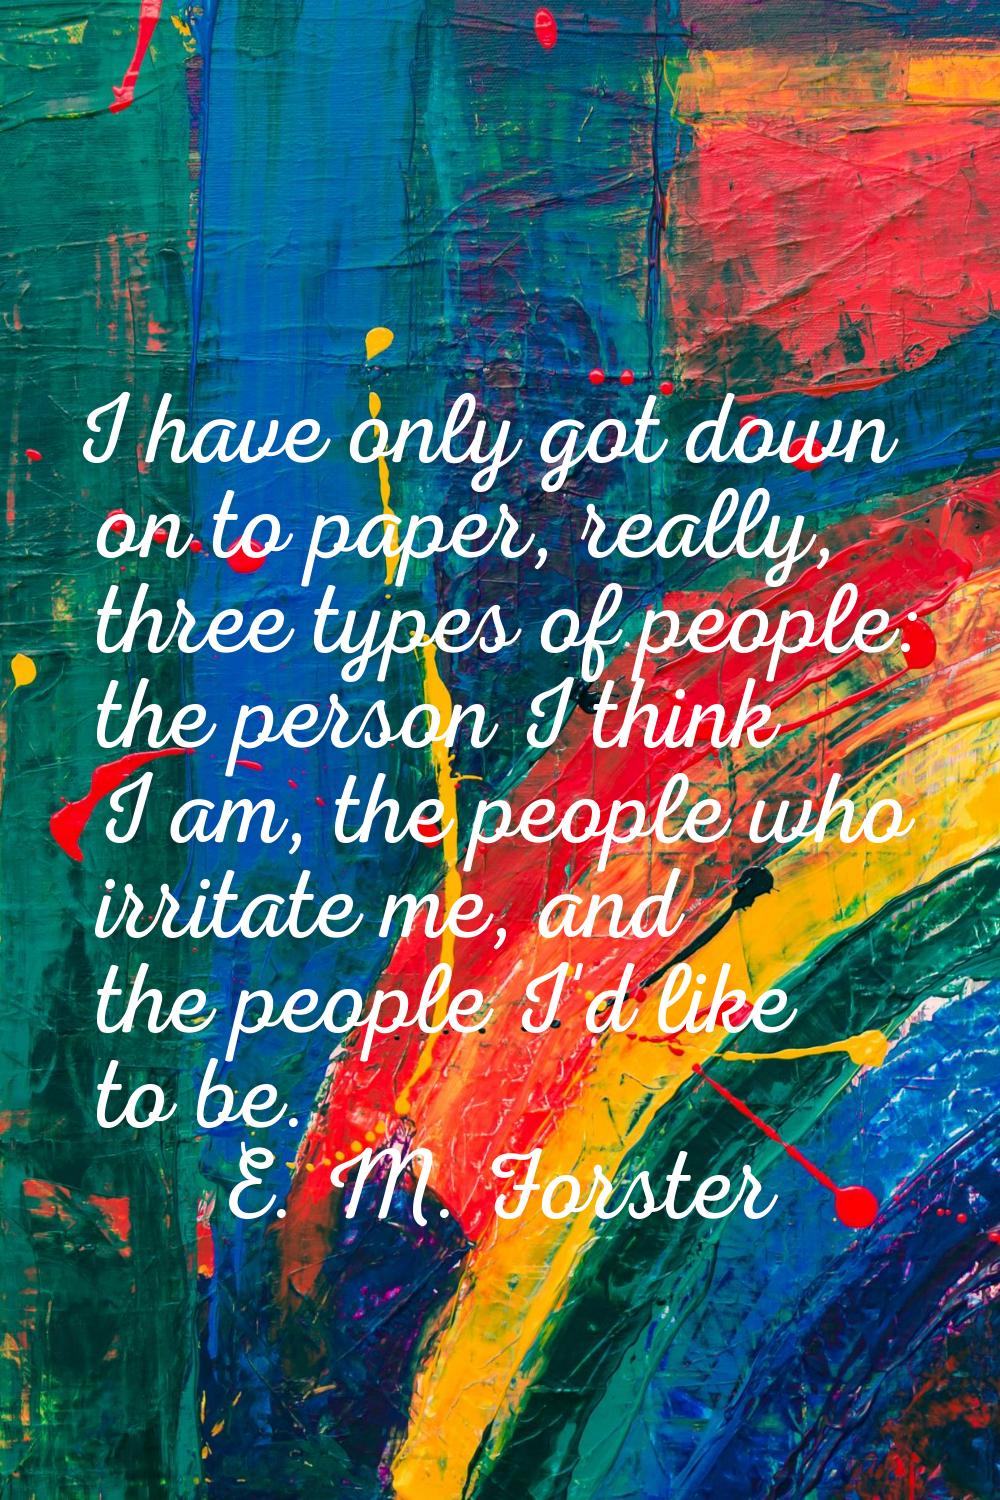 I have only got down on to paper, really, three types of people: the person I think I am, the peopl